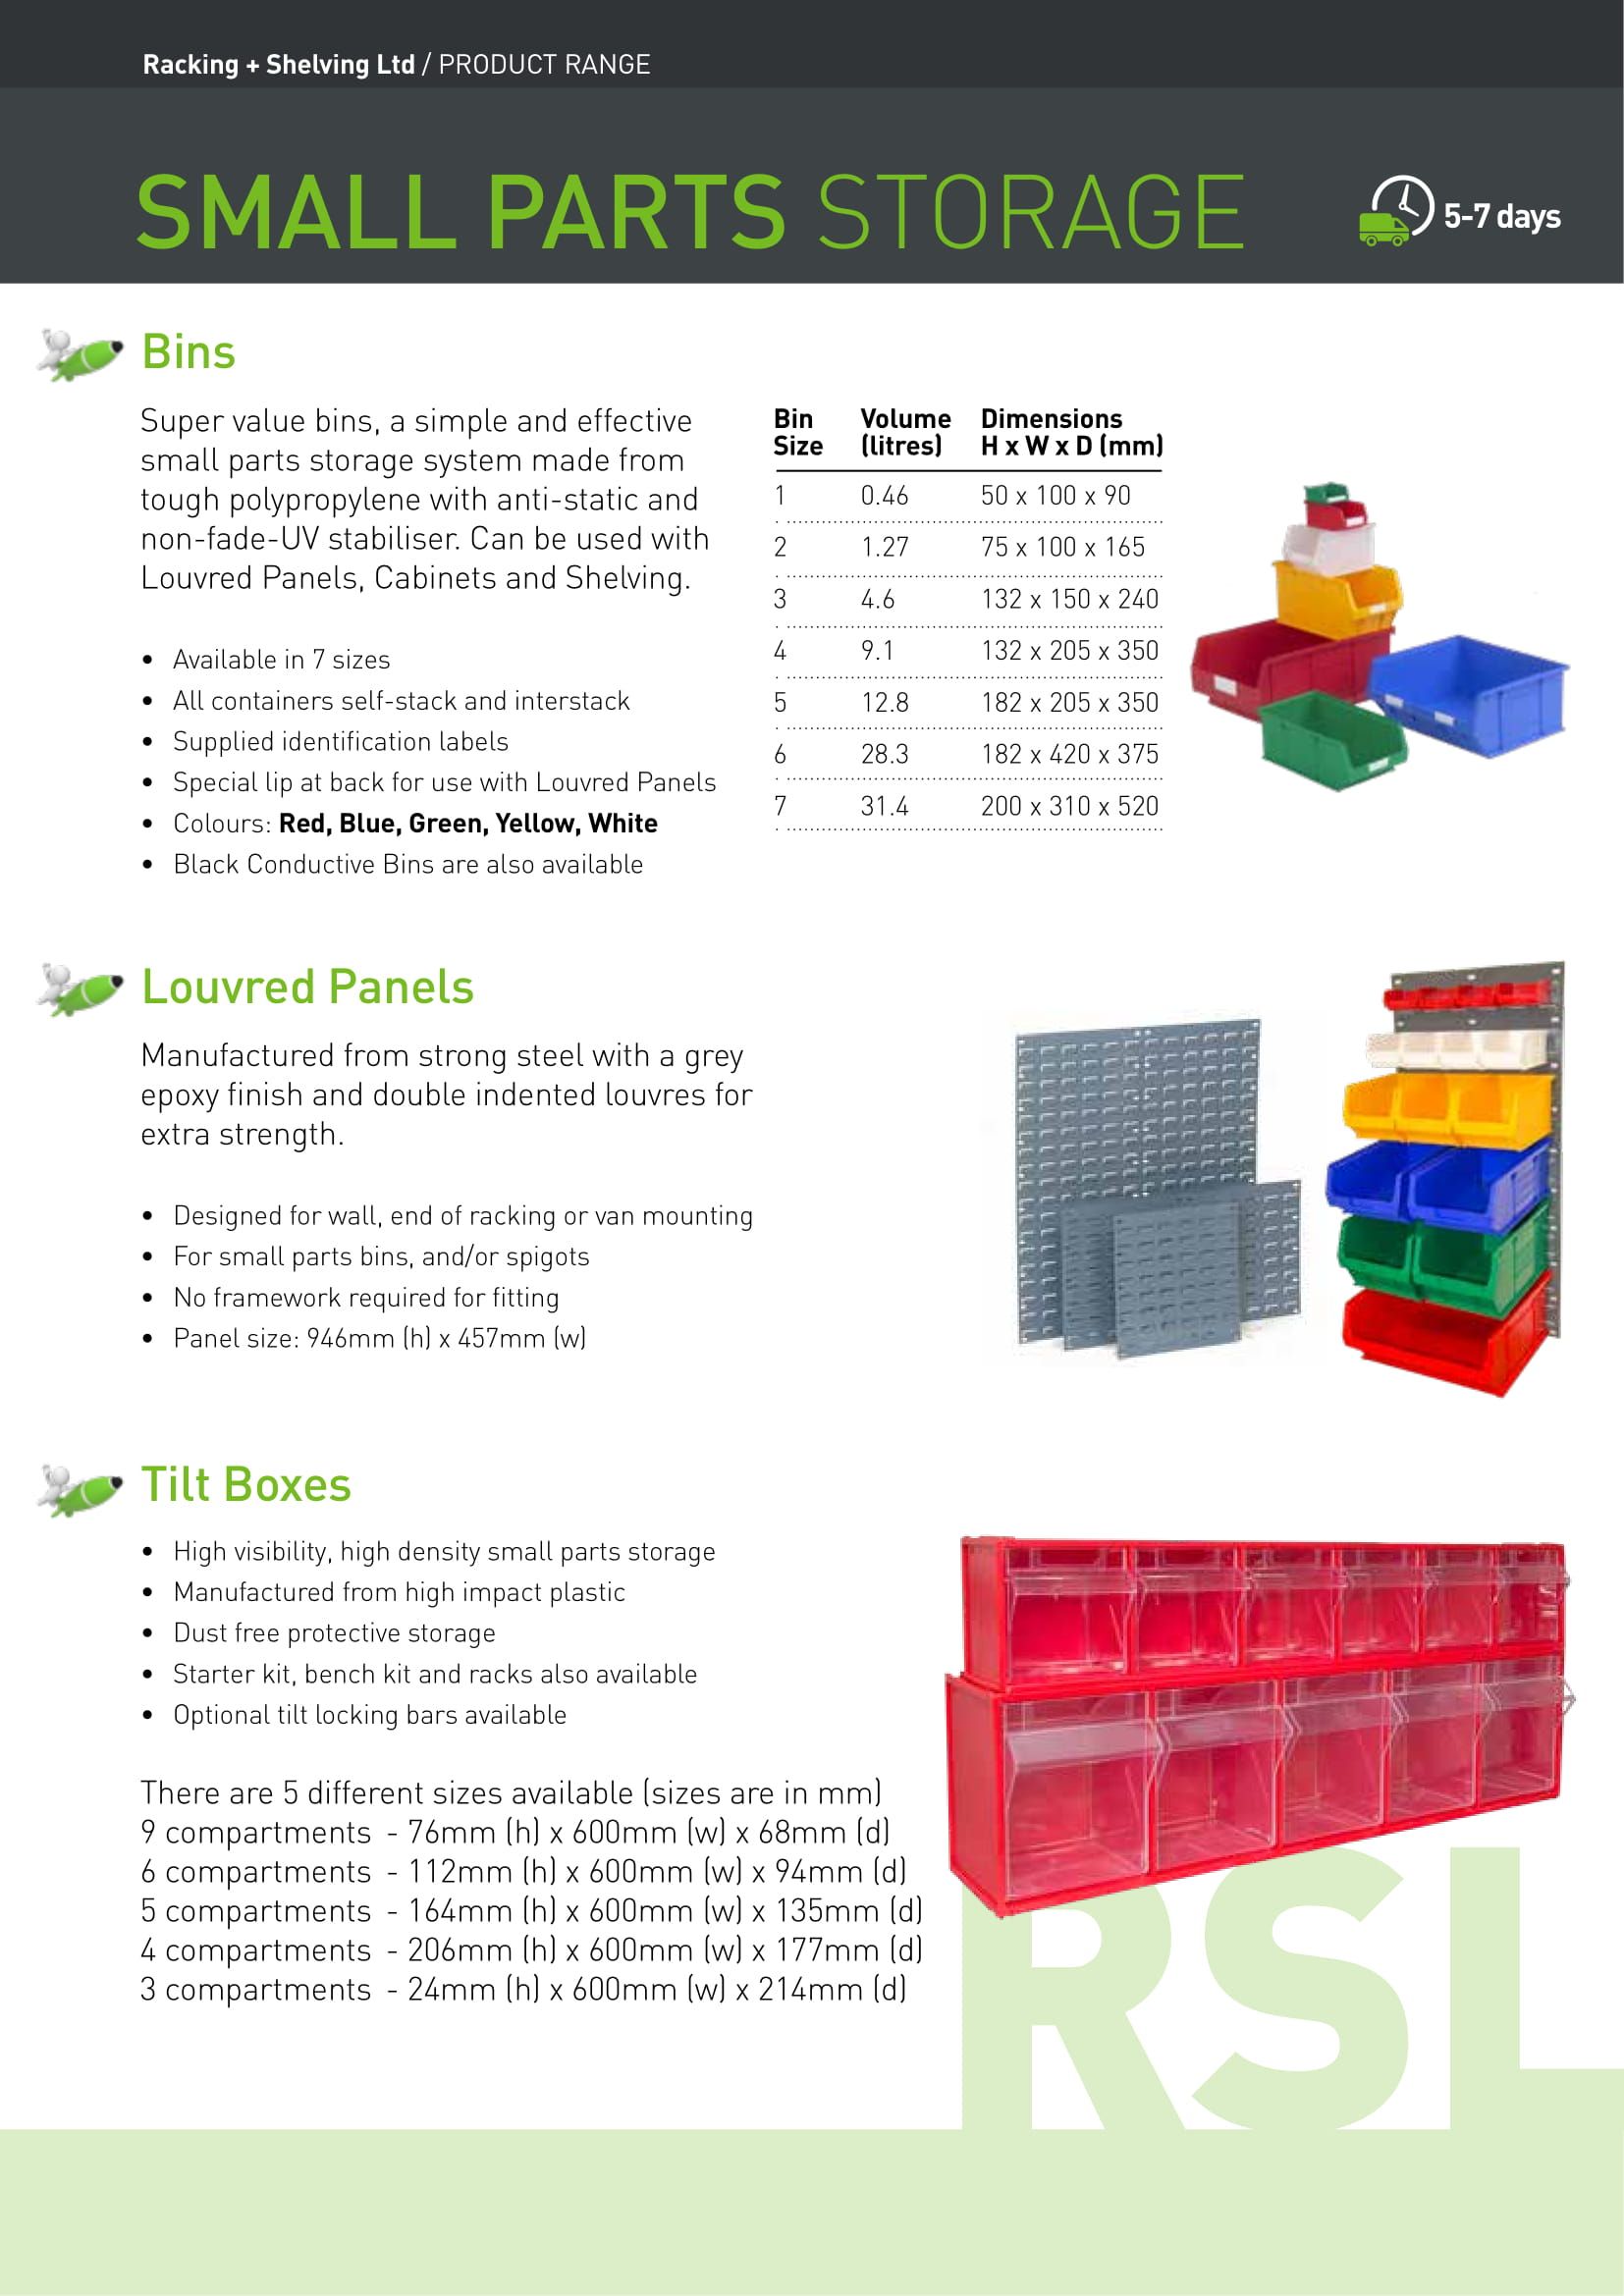 Small parts storage brochure page featuring colourful plastic bins/tubs